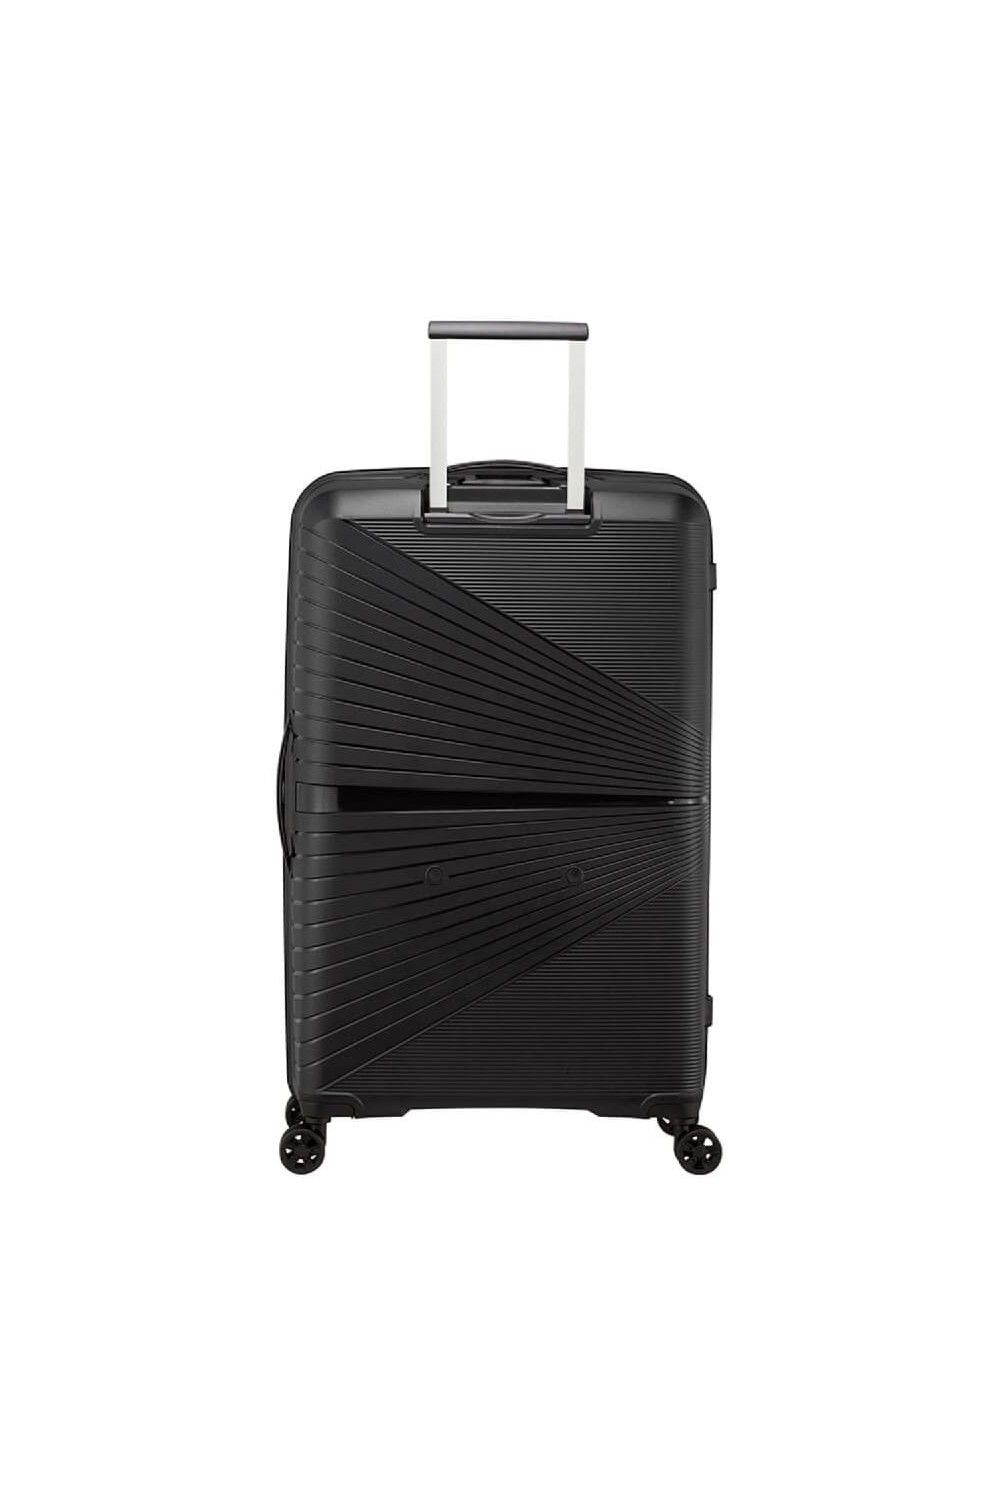 Airconic 77 cm 4 roues Valise grand